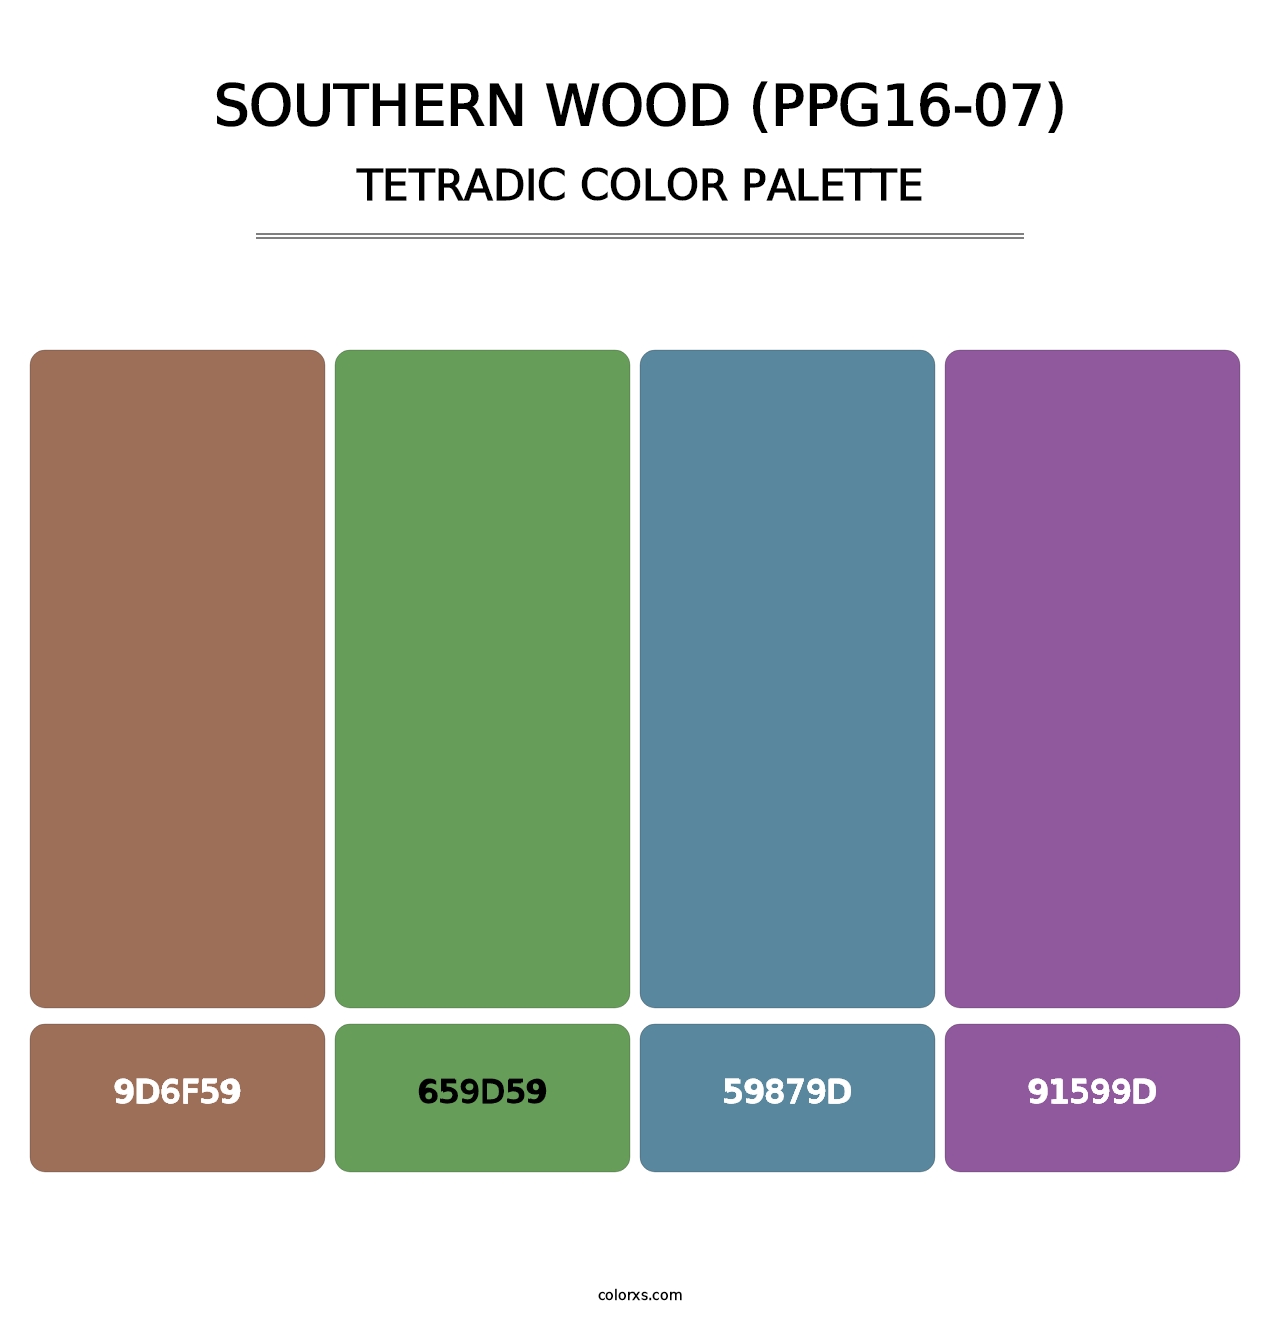 Southern Wood (PPG16-07) - Tetradic Color Palette